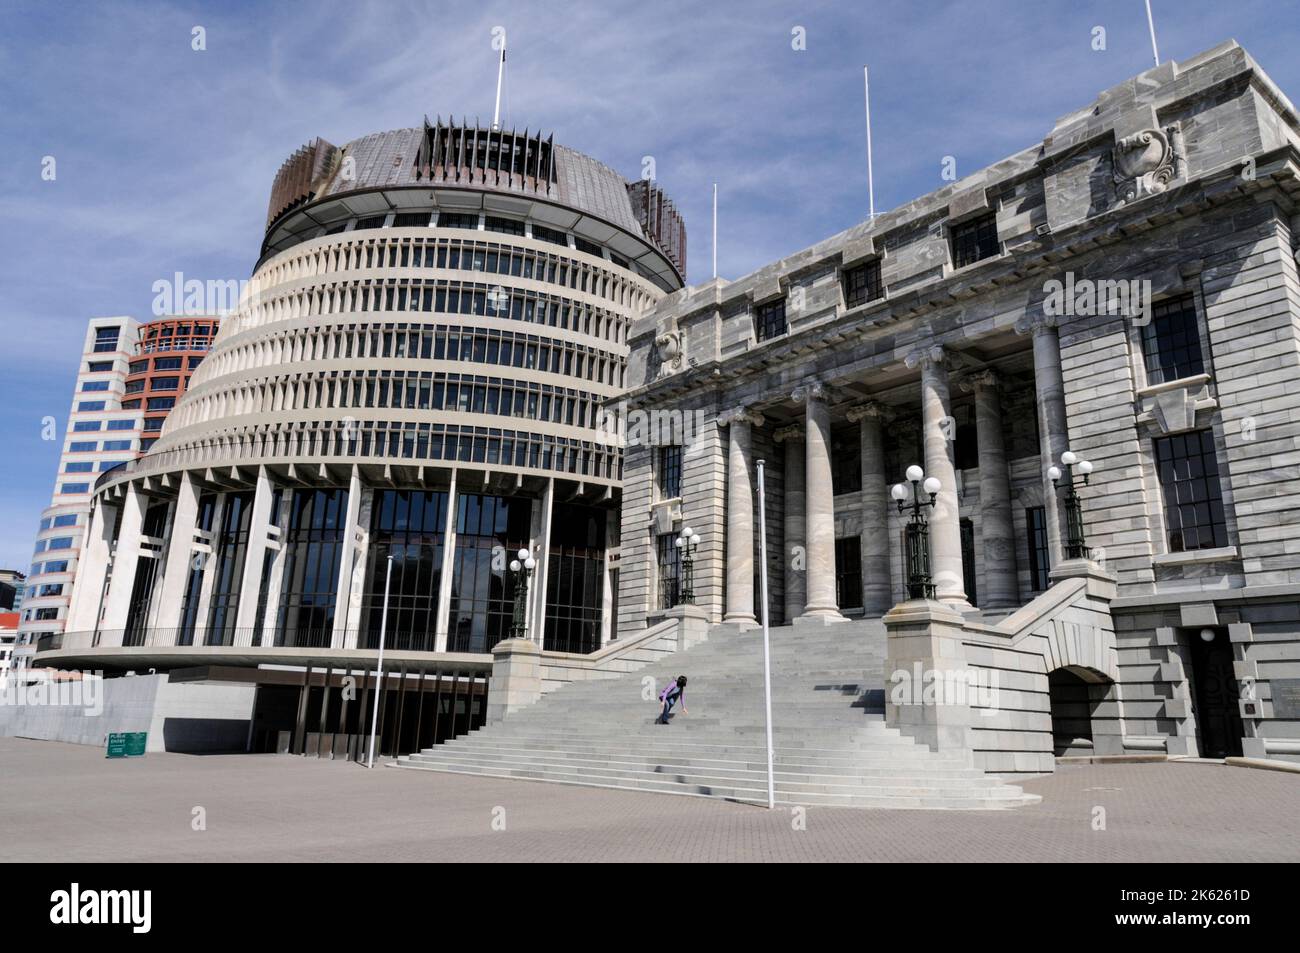 The New Zealand Parliament and the circular building nicknamed, the Beehive in Wellington on the north island of New Zealand. Wellington is nicknamed Stock Photo